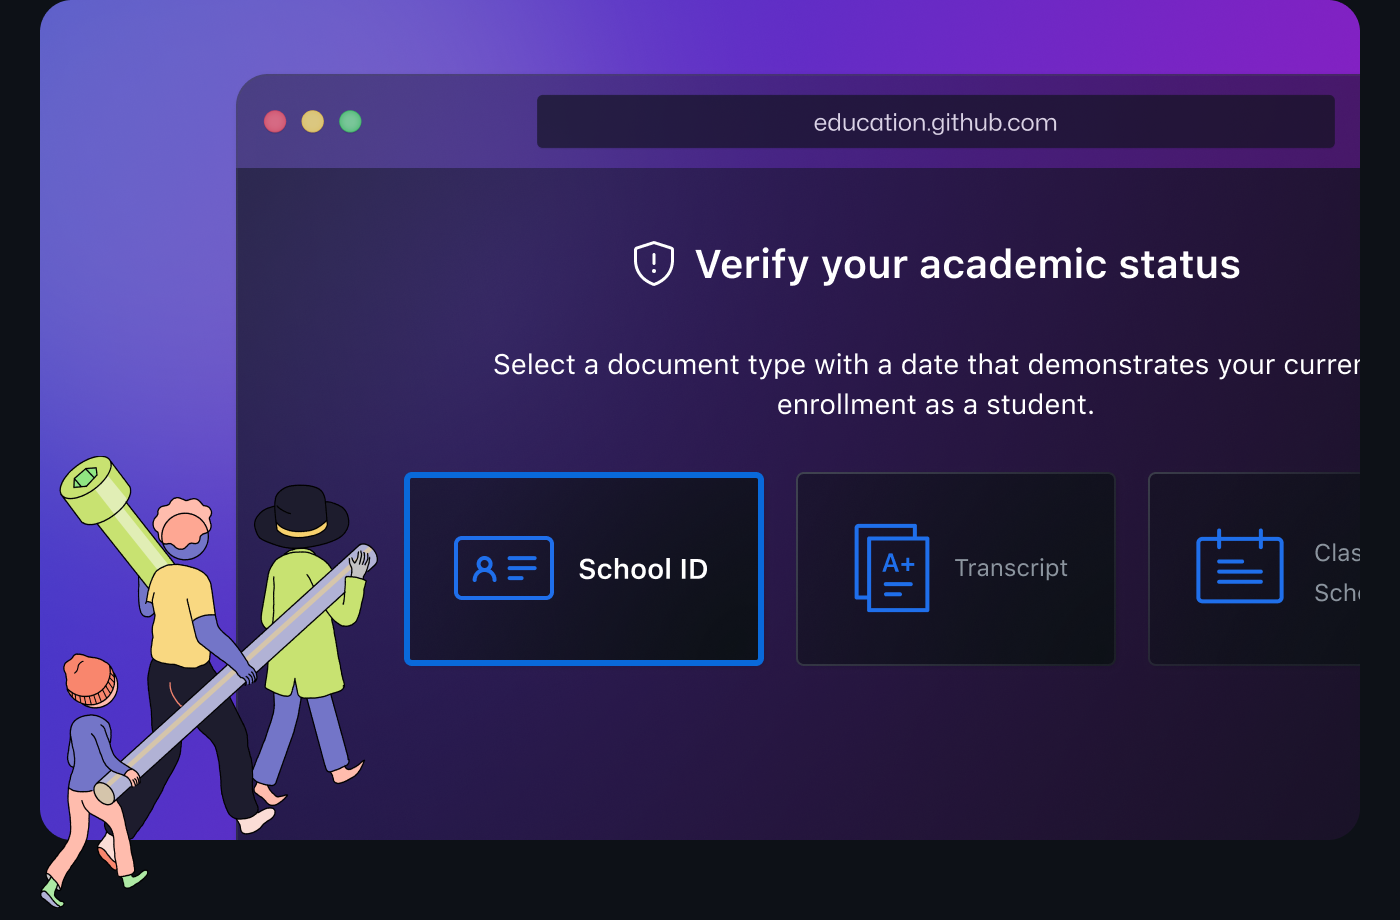 A group of 3 cartoon people walking towards a form verifying your academic status